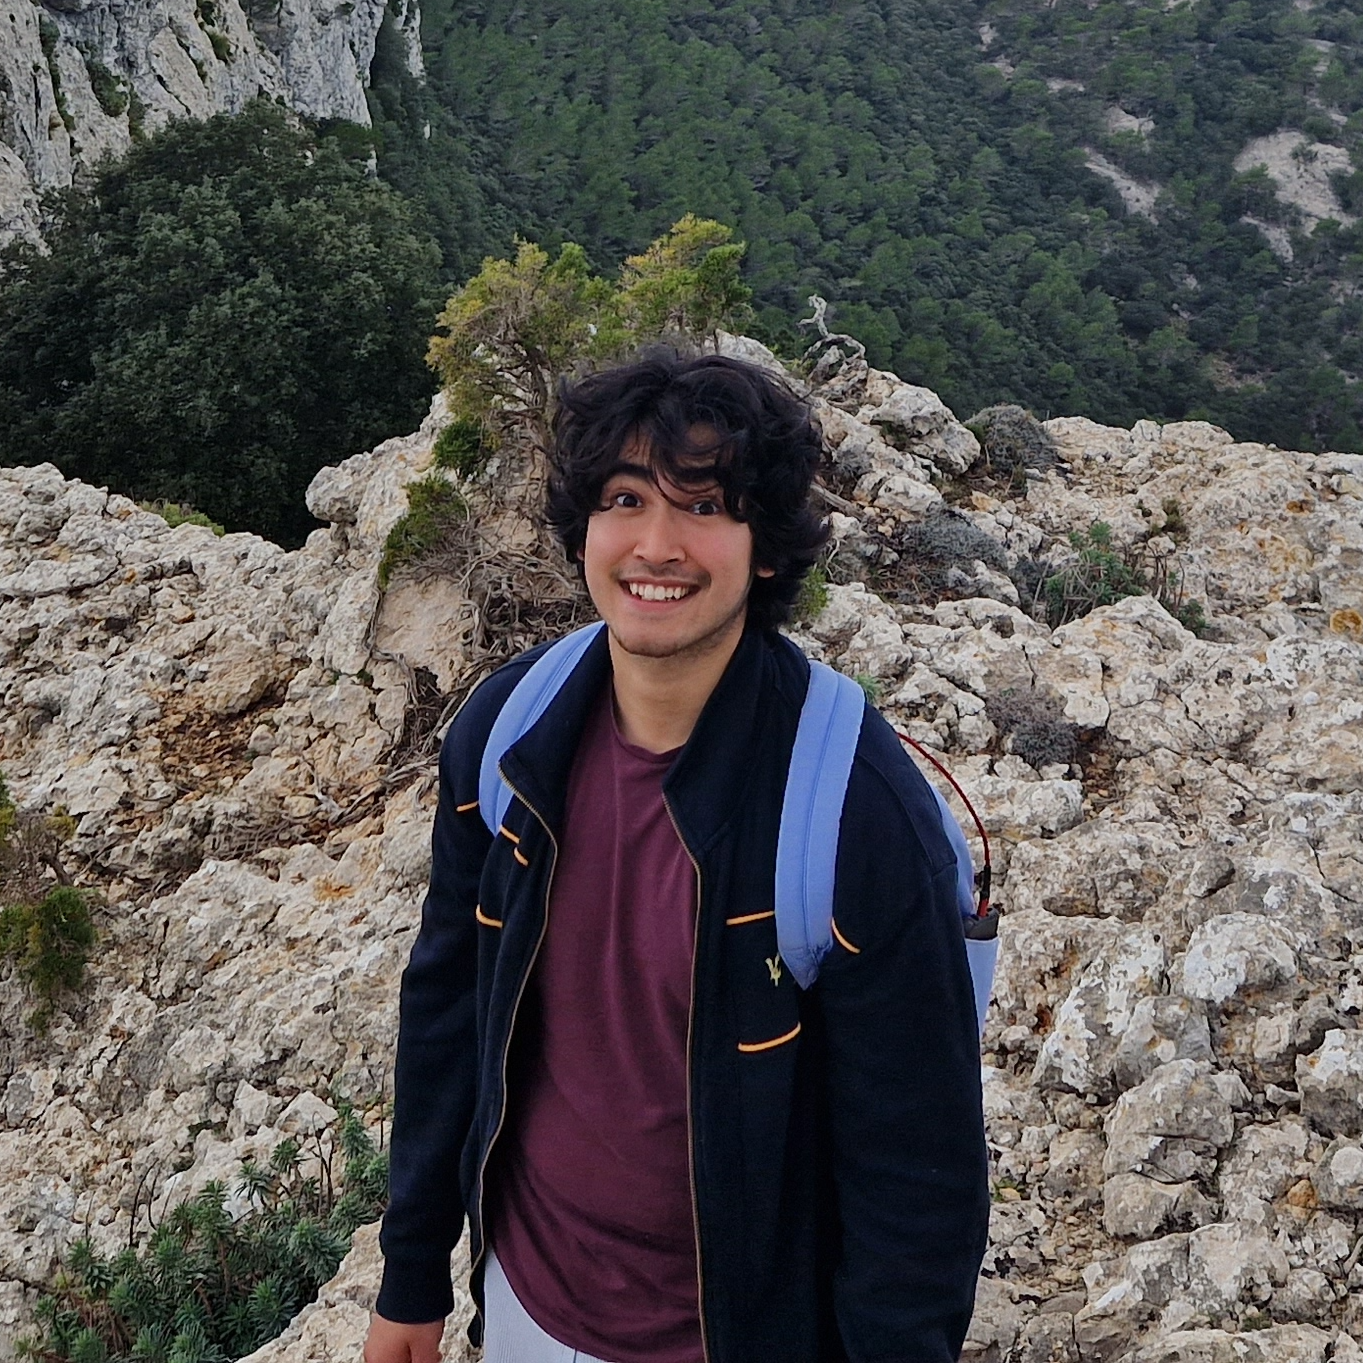 Vincent is a Master of Physics from the University of Edinburgh. He has an analytical background and enjoys solving mathematical problems with computer modelling and AI, in particular. Vincent likes to stay active in his free time by hiking, climbing, bouldering, and playing badminton and squash - to name just a few!